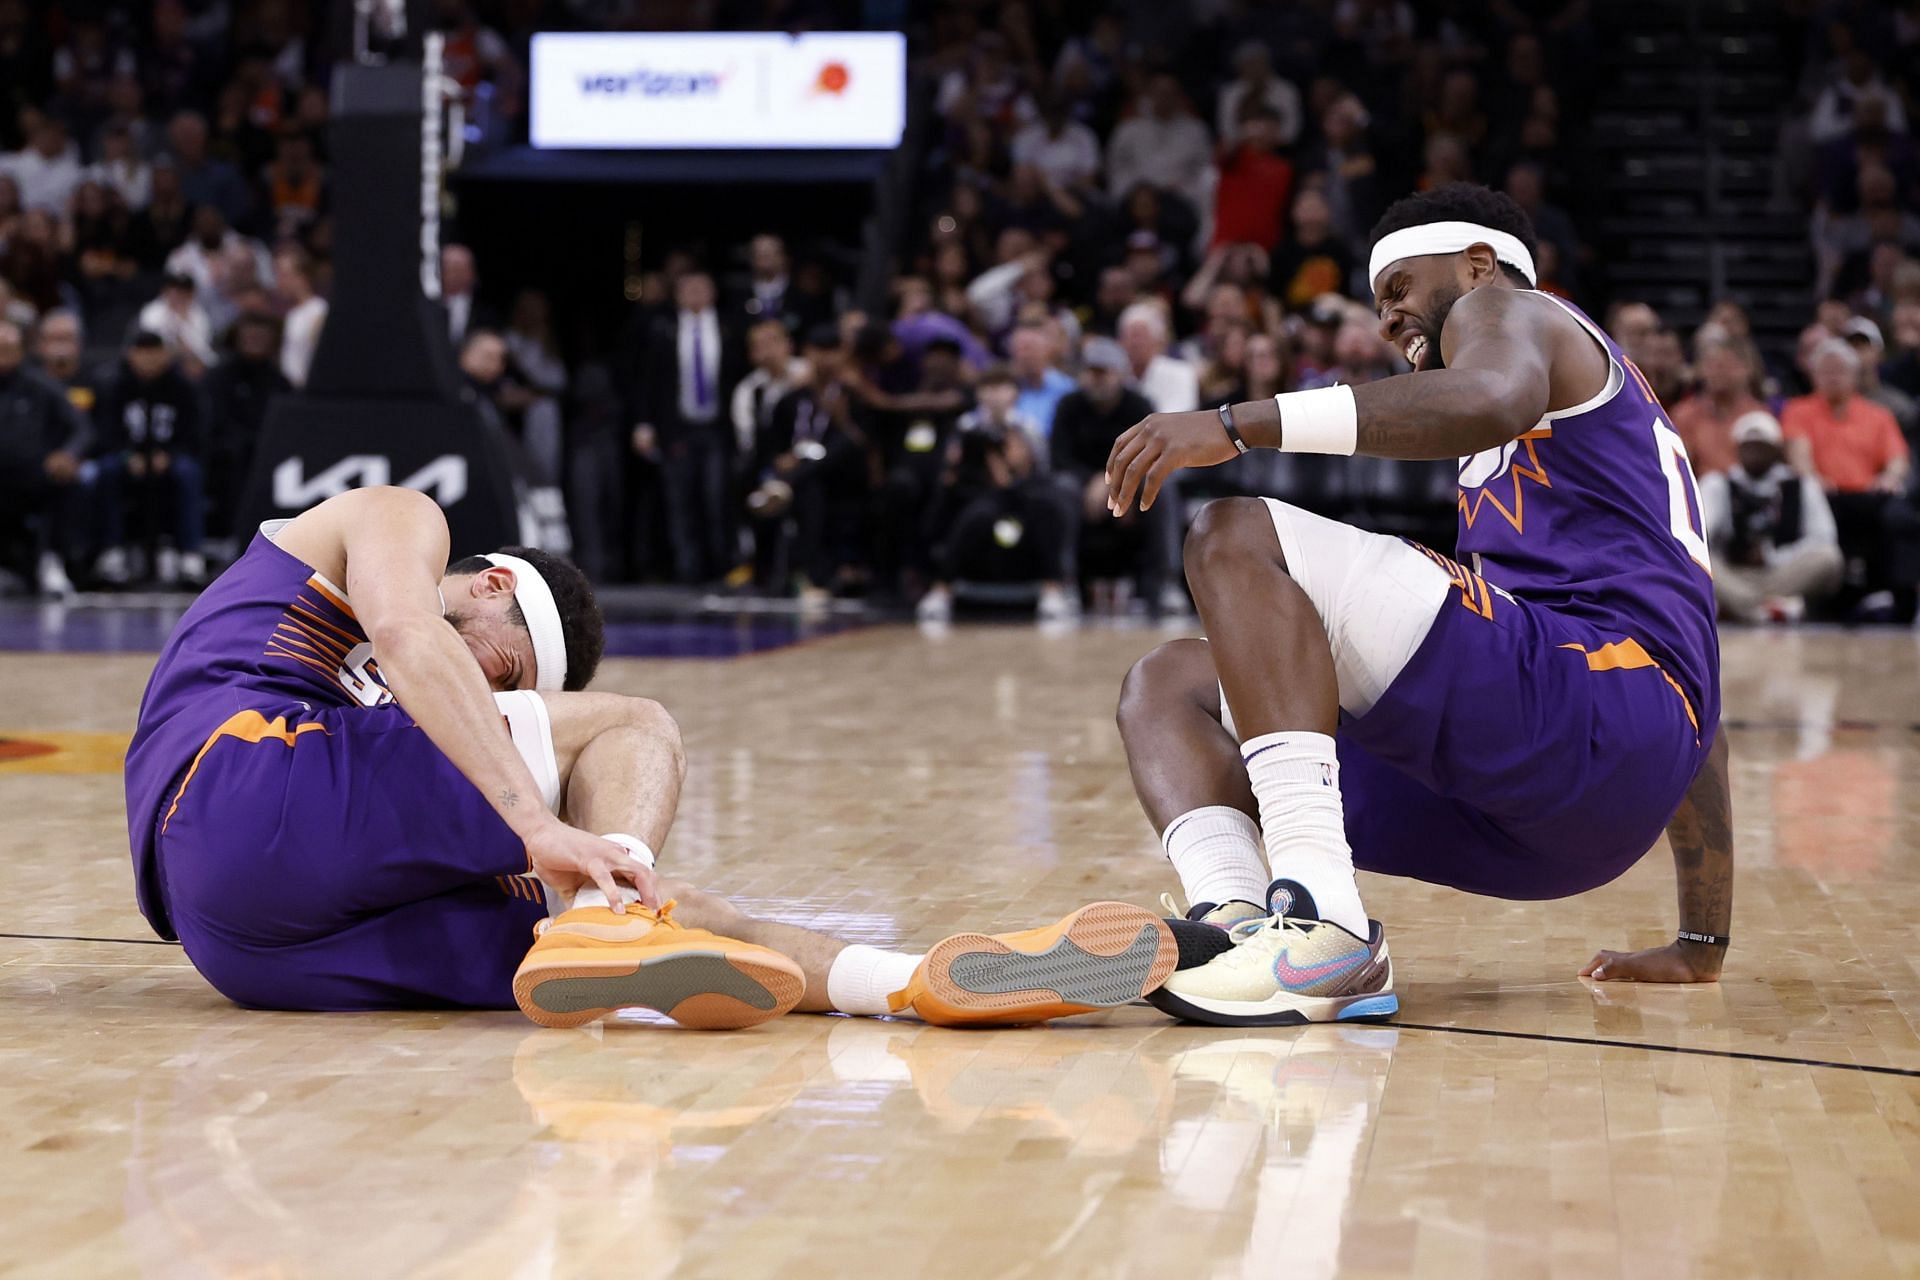 Phoenix Suns Timeline for Devin Booker's Injury Revealed - Sports